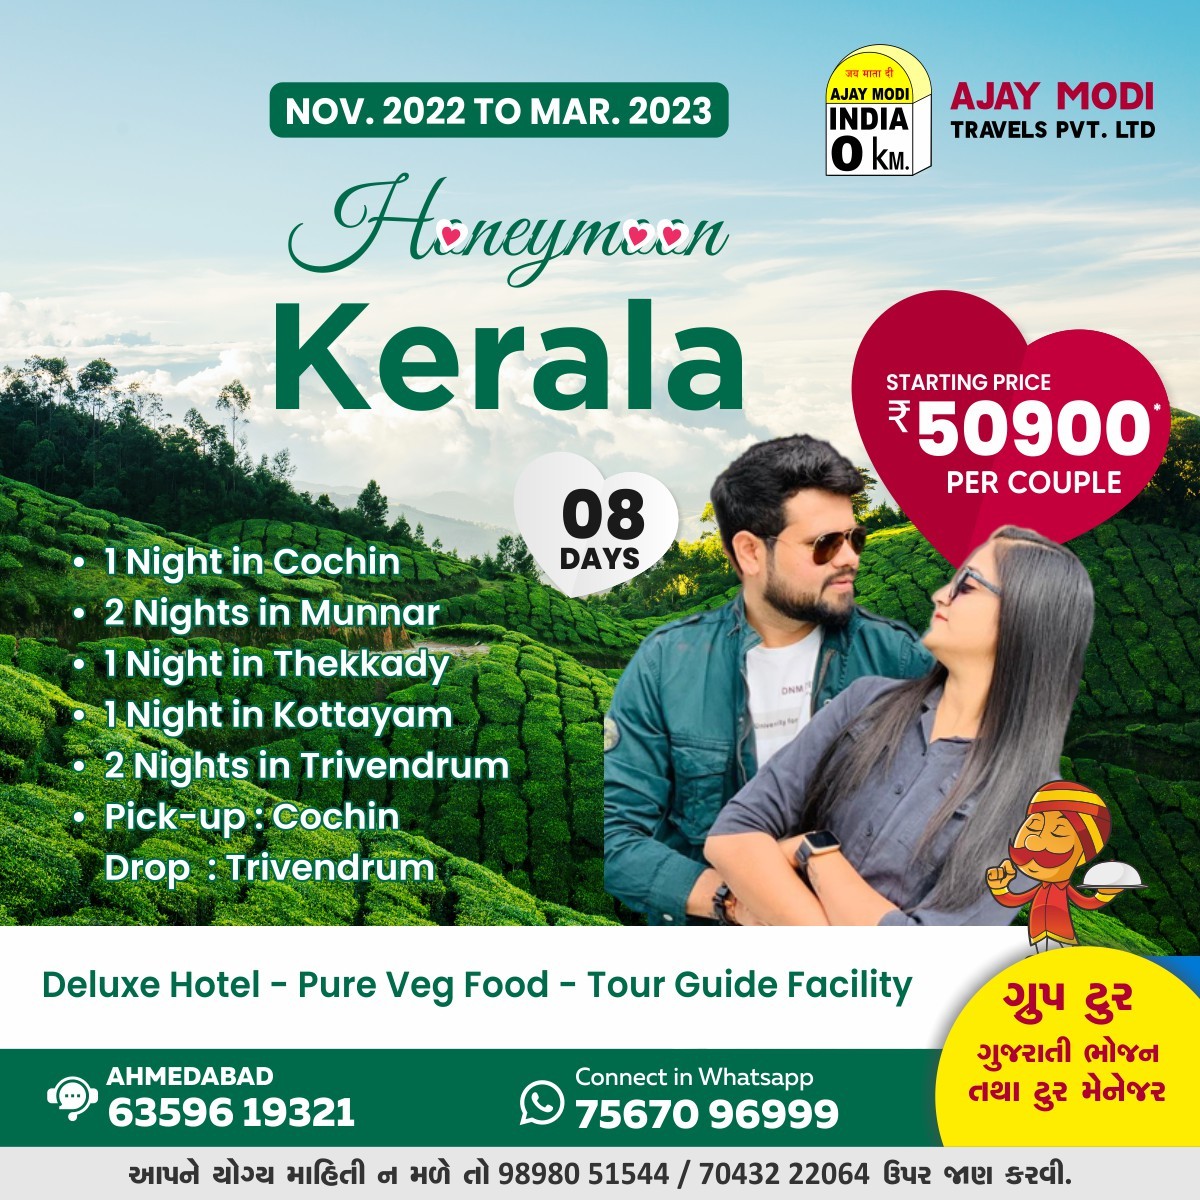 ajay modi tour packages from ahmedabad